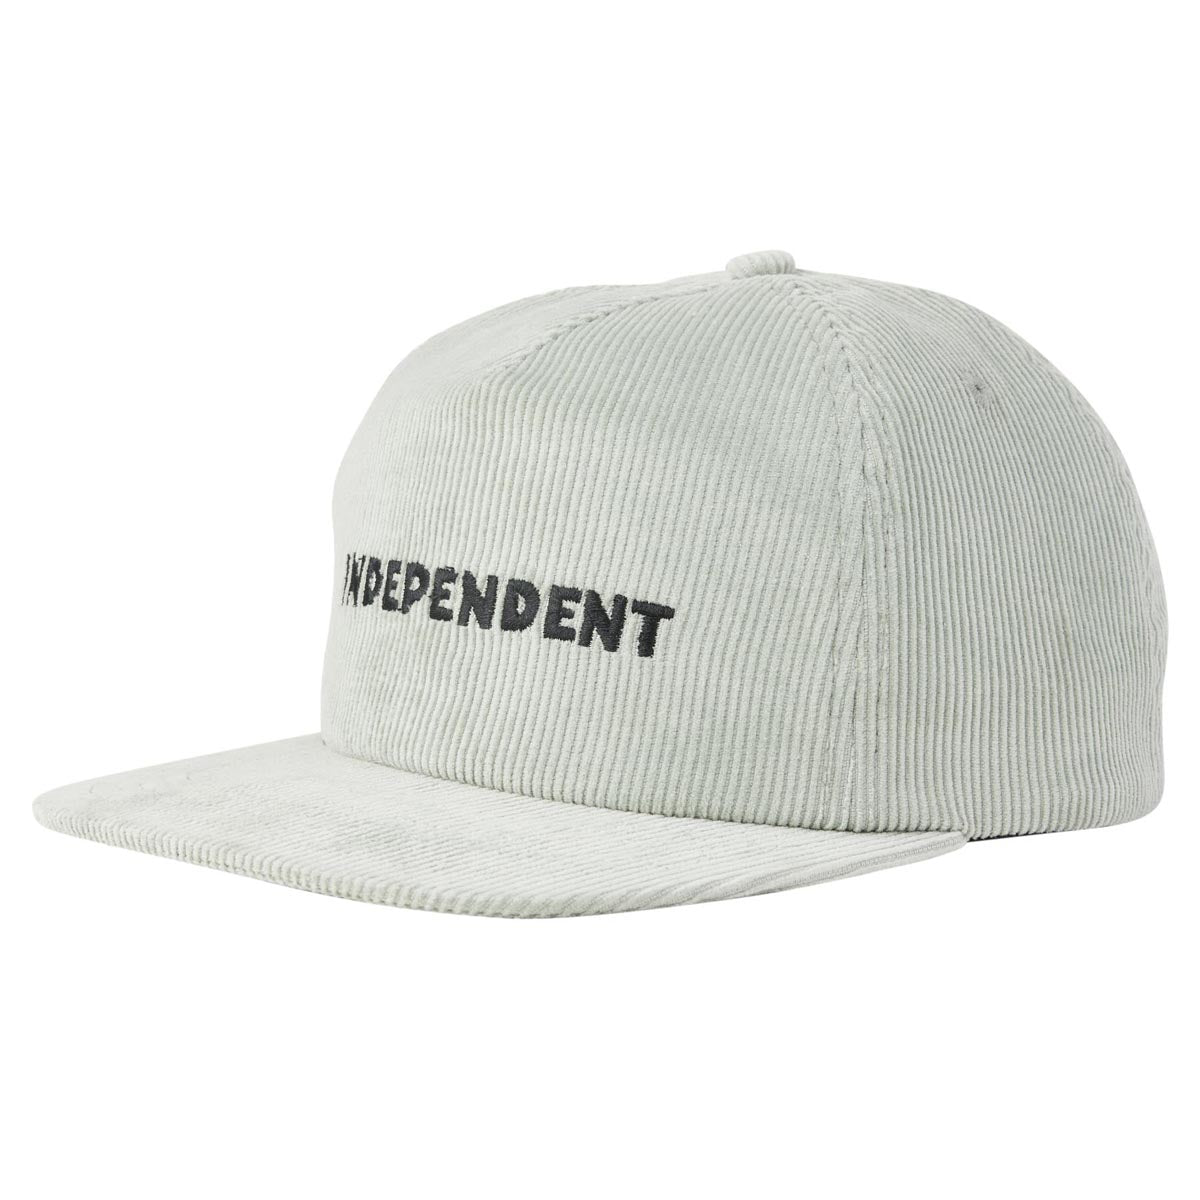 Independent Beacon Snapback Unstructured Hat - Grey image 1